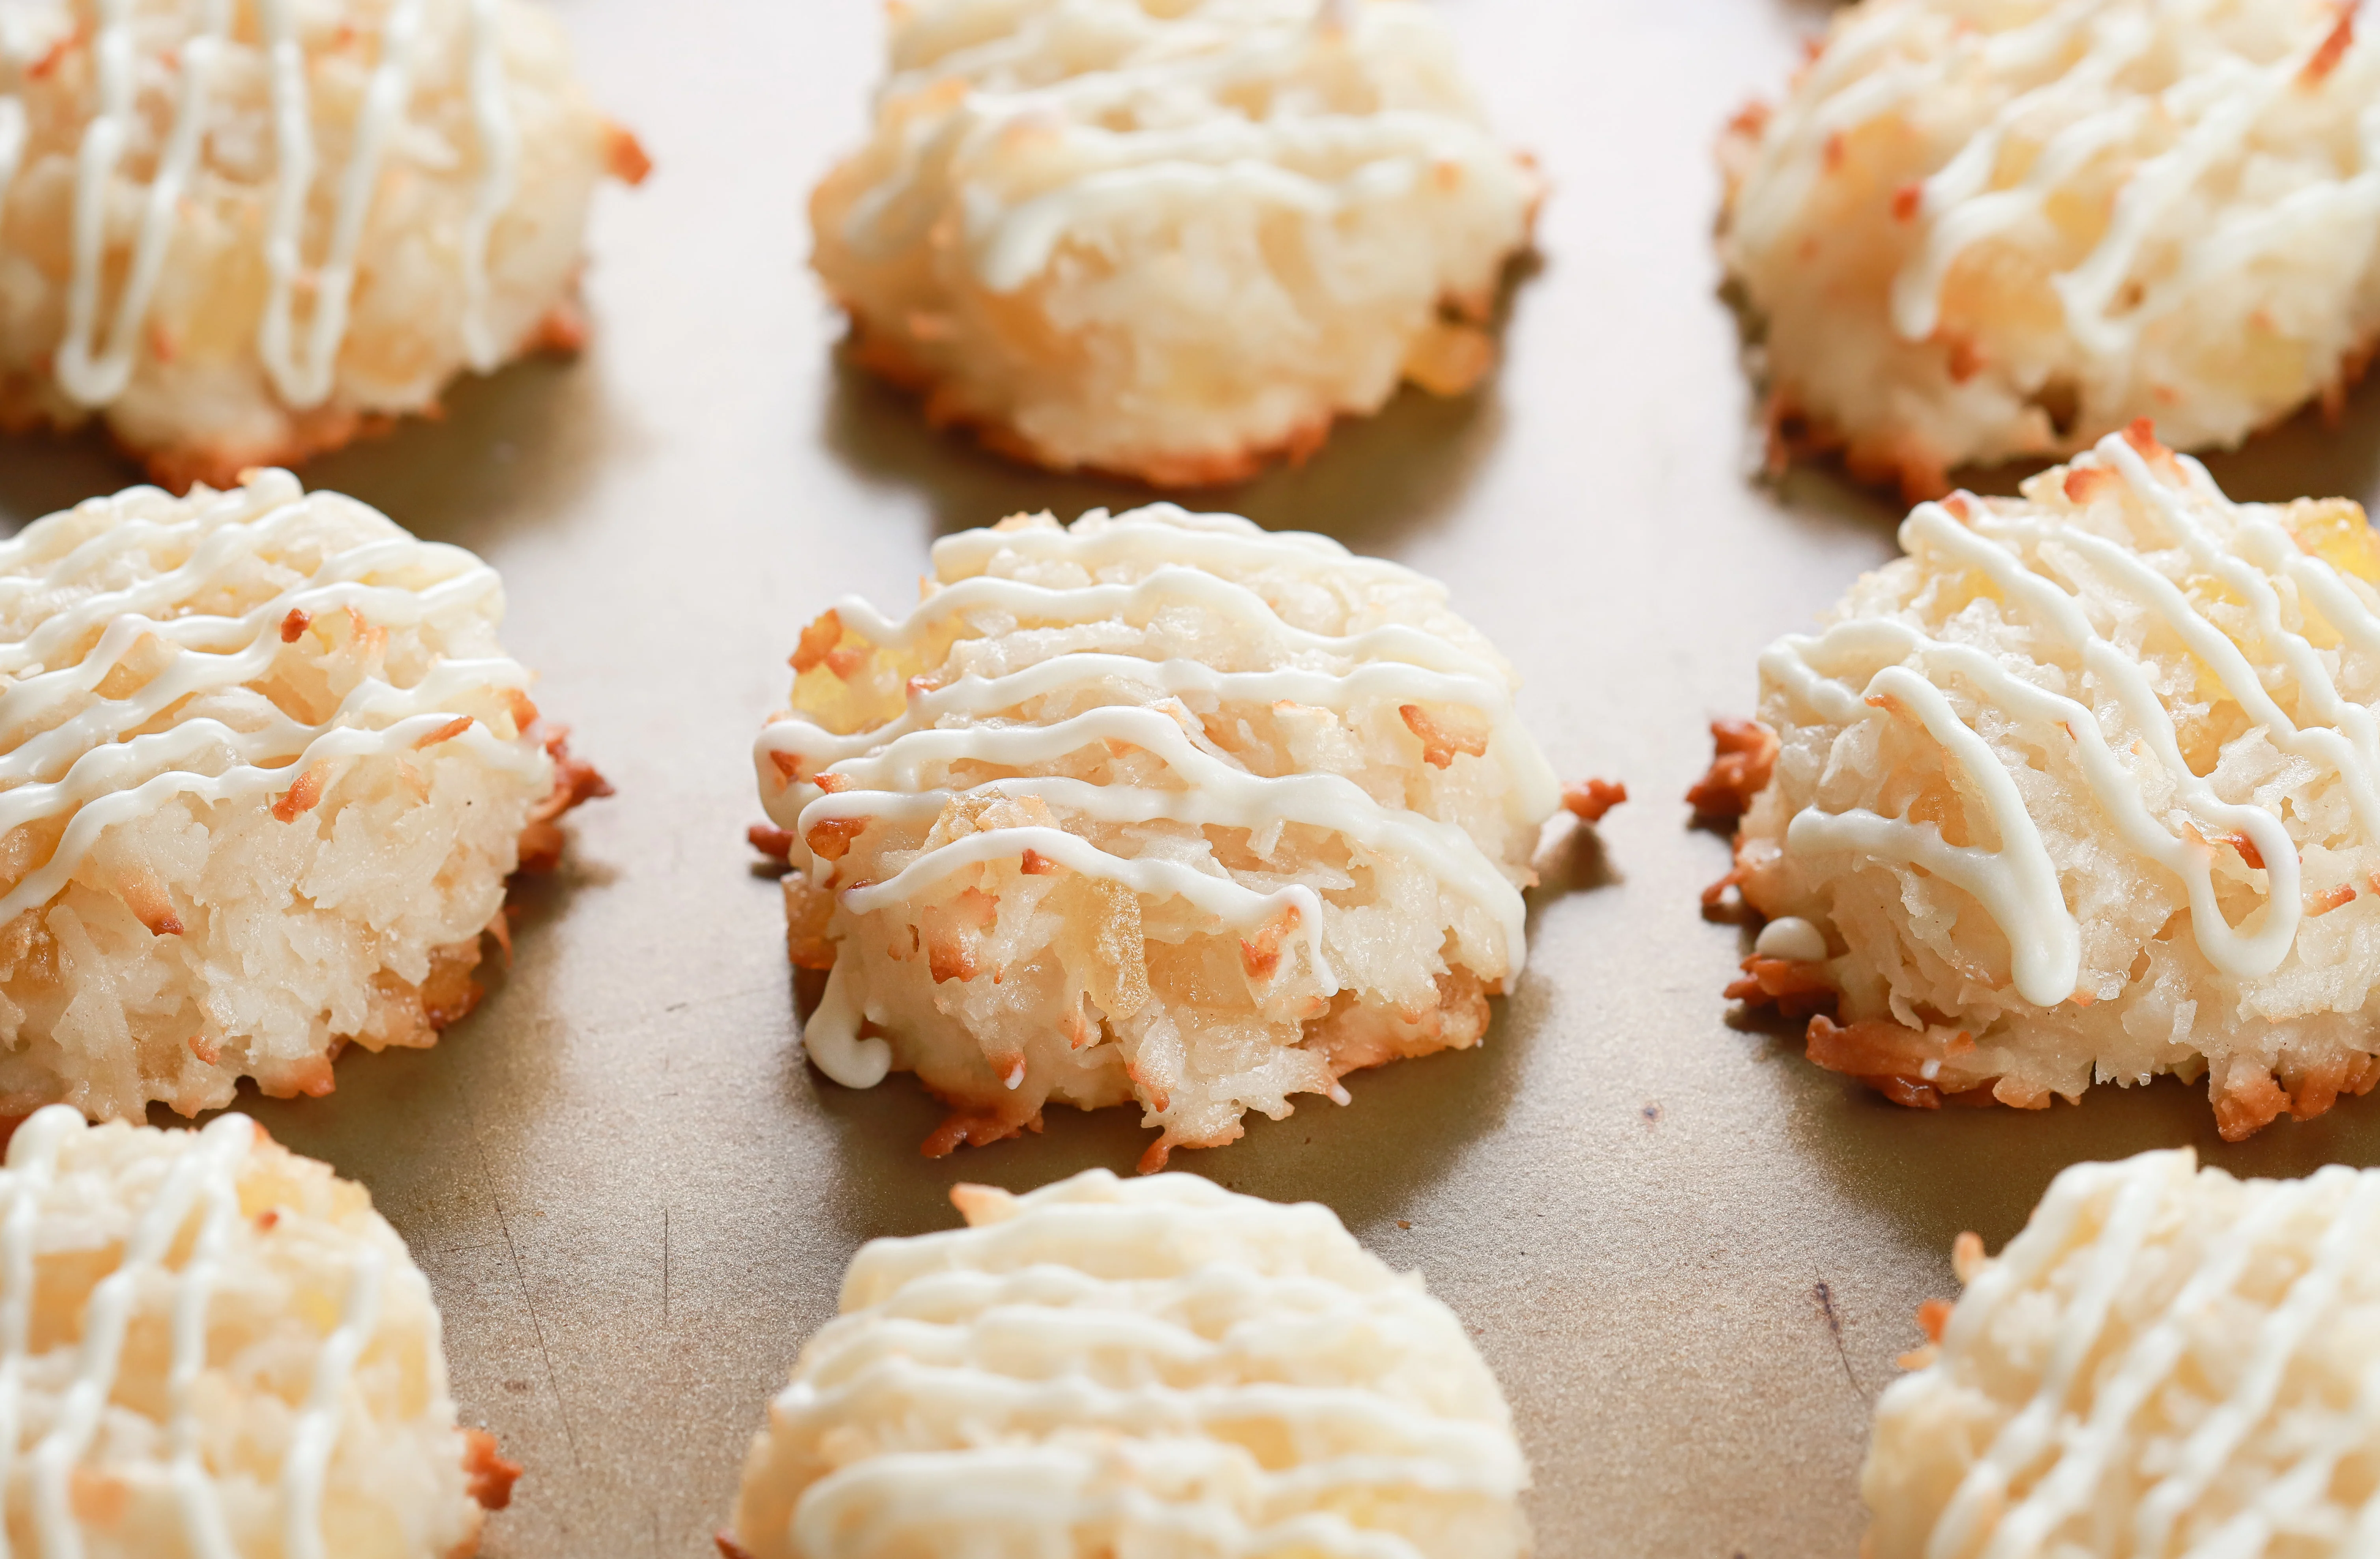 Up close side view of a white chocolate drizzled pineapple coconut macaroon on a baking sheet surrounded by other macaroons.